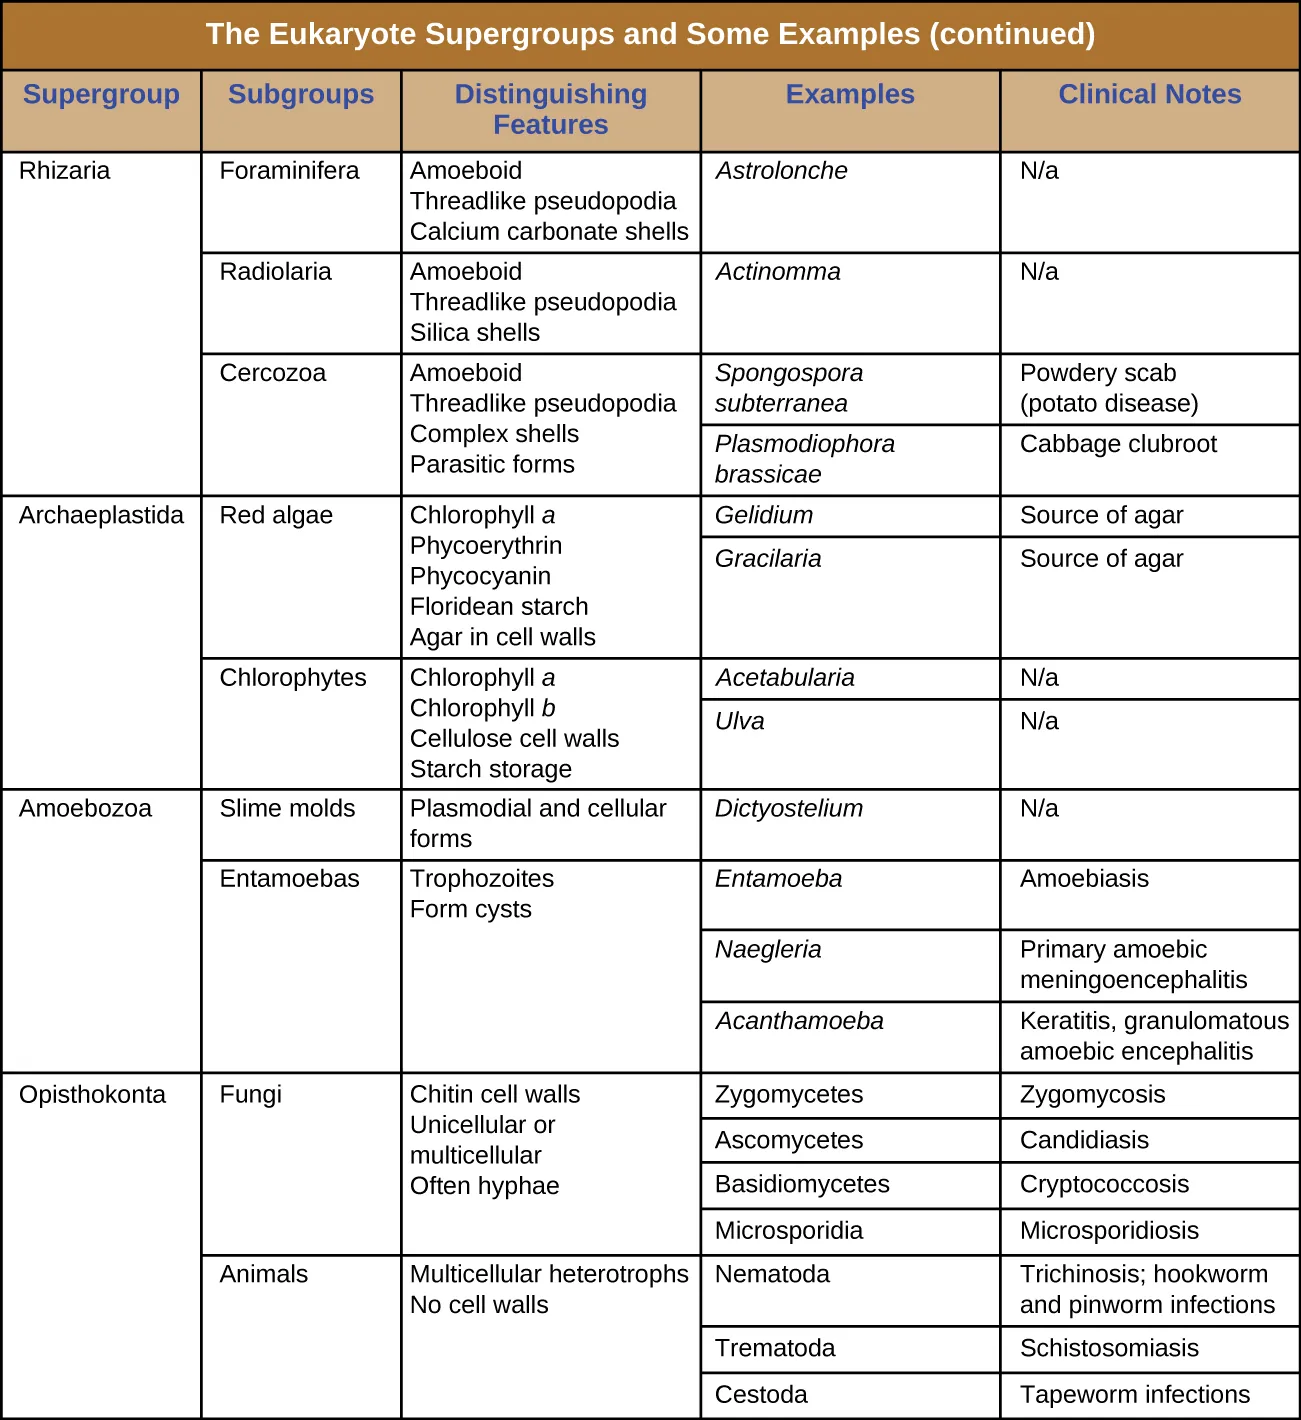 Table titled: the eukaryote supergroups and some example species. There are 5 columns in the table: supergroup, subgroup, distinguishing features, examples and clinical notes. The supergroup Rhizaria is divided into 3 subroups: Foraminifera, Radiolaria, and Cerozoa. Foraminifer have the following distinguishing features: amoeboid, thereadlike pseudopodia, calclium carbonate shells. An example is Astrolonche which does not cause disease. Radiolaria have the following distinguishing features: amoeboid, threadlike pseudopodia, silica shells. An example is Actinomma which does not cause disease. Cerozoa have the following distinguishing features: amoeboid, threadlike pseudopodia, complex shells, parasitic forms. Examples include Spongospora subterranean which causes powdery scab (potato disease) and Plasmodiophora brassicae which causes cabbage clubroot. Supergroup Archaeplastida is divided into 2 groups: red algae and Chlorophytes. Red algae have the following distinguishing features: chlorophyll a, phycoerythrin, phycocyanin, flodean starch, agar in cell walls. Examples include Gelidium and Gracilaria which are sources of agar. Chlorophytes have the following distinguishing features: chlorphyll a, chlorophyll b, cellulose cell walls, starch storage. Examples include Acetabularia and Ulva which do not cause disease. Supergroup Amoebozoa is divided into 2 subgroups: slime molds and entamoebas. Slime molds have plasmodial and cellular forms. An example is Dictyostelium which does not cause disease. Entamoebas have the following distinguishing features: trophozoites and form cysts. Examples include Entamoeba which causes Amoebiasis, Naegleria which causes Primary amoebic meningoencephalitis, and Acanthamoeba which causes Keratitis, and granulomatous ameoebic encephalitis. Supergroup Opisthokonta is divided into subroups fungin and animals. Fungi have the following distinguishing features: chitin cell walls, unicellular or multicellular, often hyphae. Examples include Zygomyctes which cause zygomycosis, Asomycetes which cause Candidiasis, Basidiomycetes which cause Cryptococcosis, and Microsporidia which causes microsporidiosis. Animals have the following distinguishing features: multicellular heterotrophs with no cell walls. Examples include Nematoda which cause Trichonosis, hookworm and pinworm infections, Termatoda which causes Schistosomiais, and Cestoda which causes tapeworm infection.